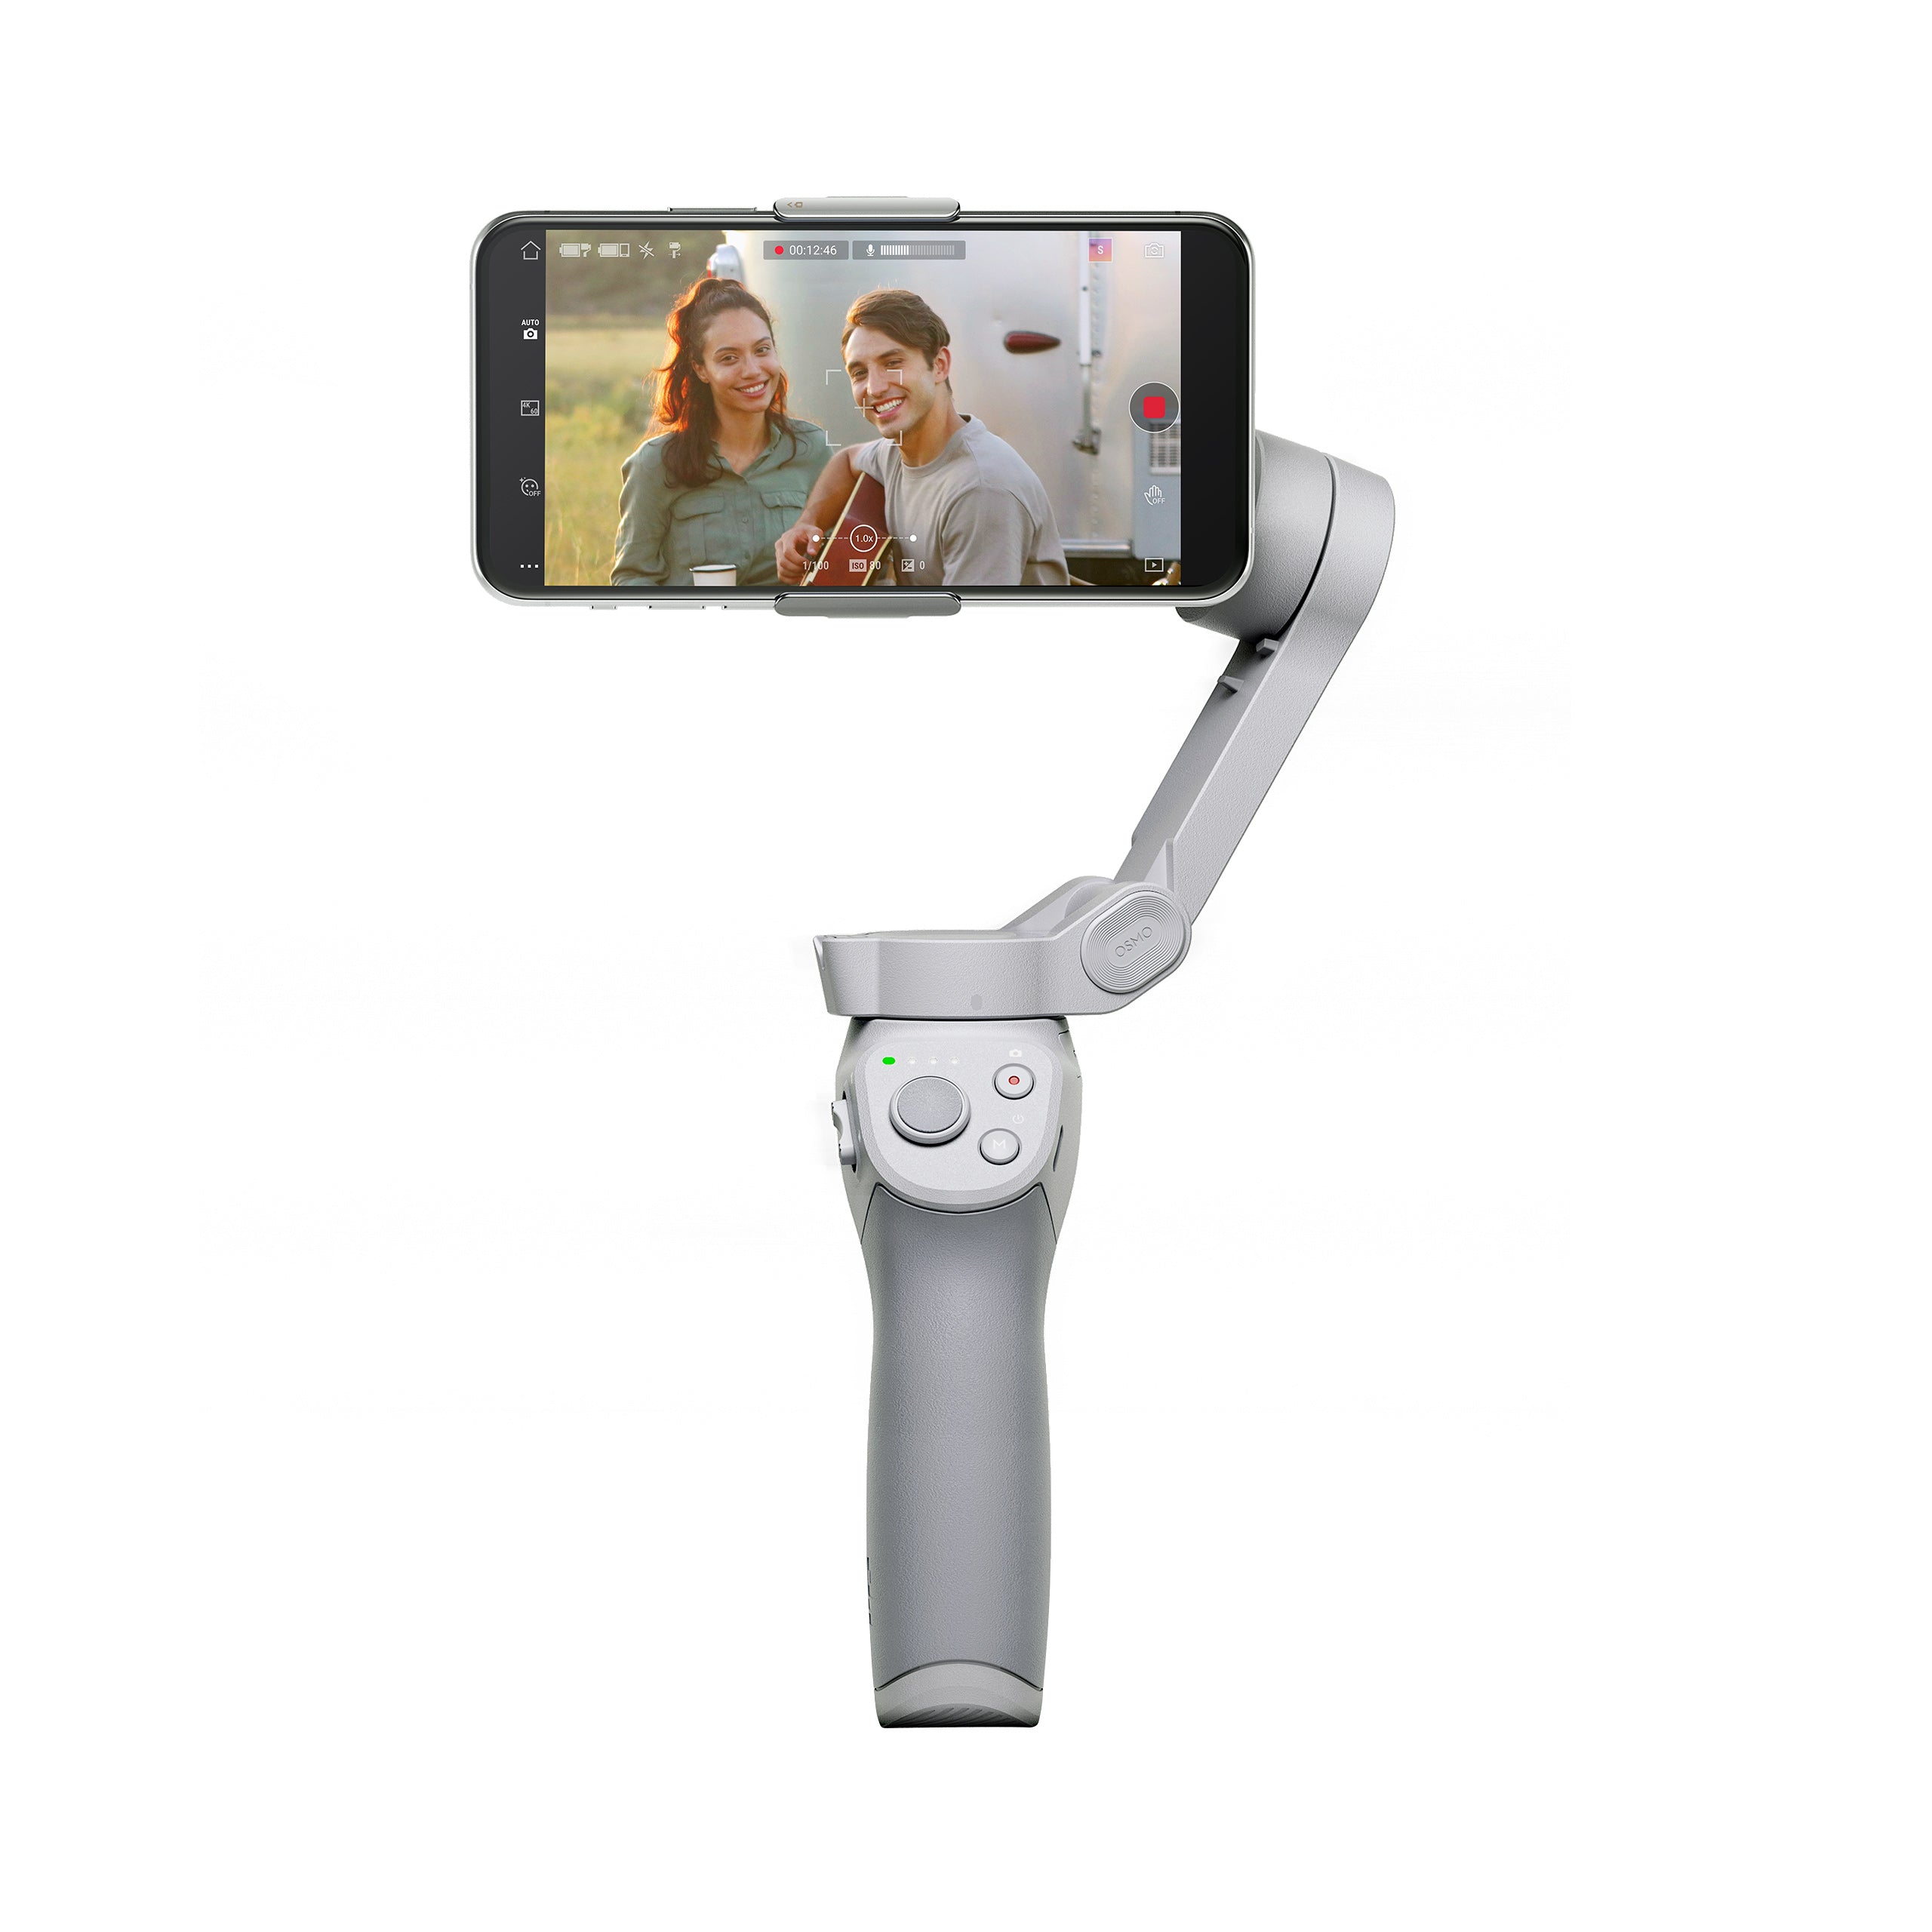 DJI Osmo Mobile SE 3-Axis Gimbal Stabilizer with Gesture Controls